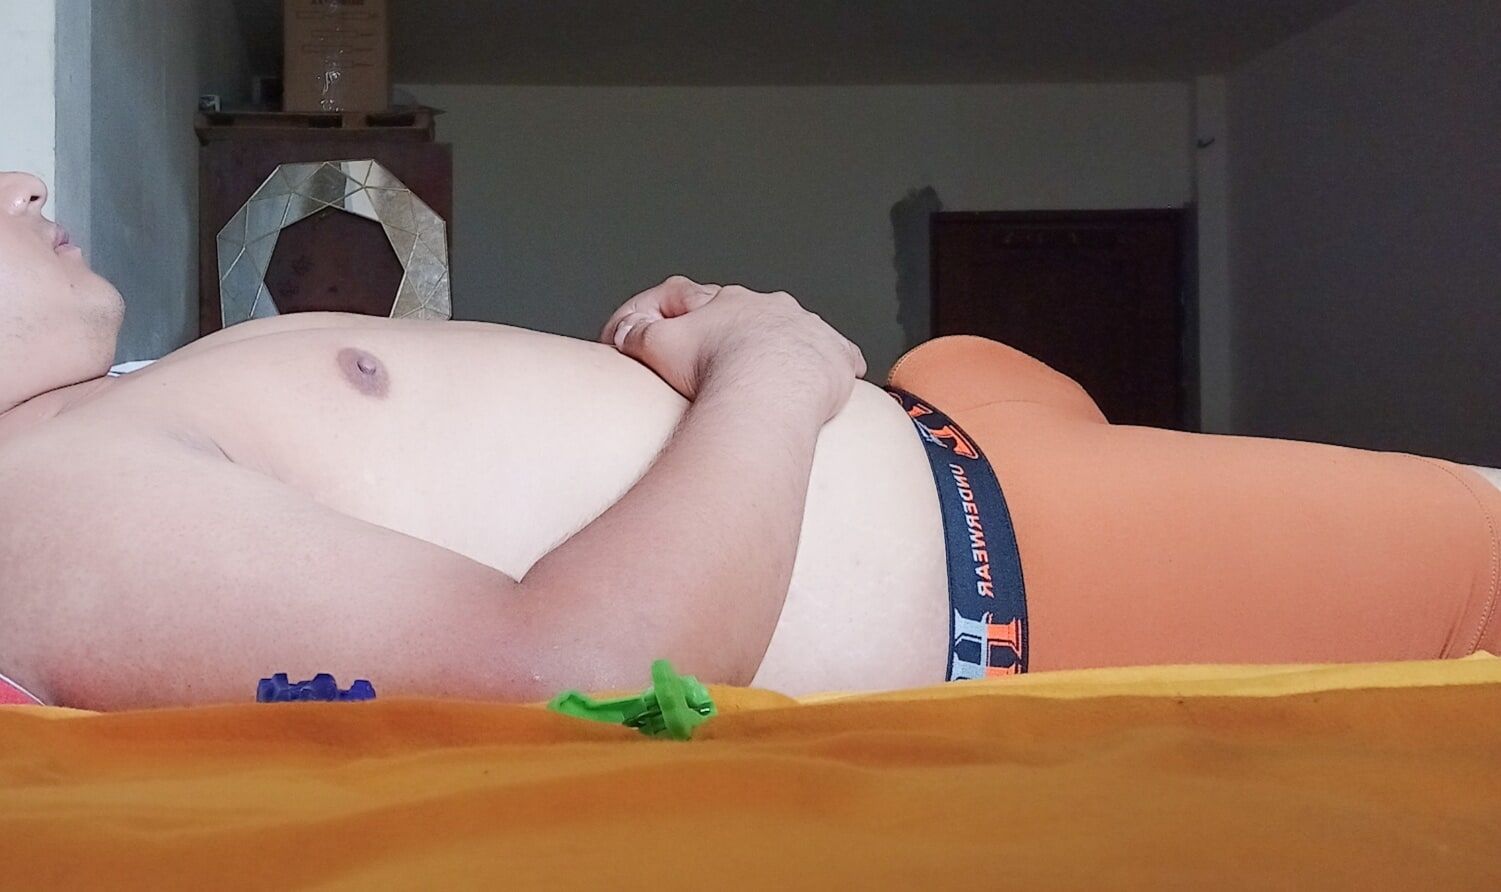 Me Lying Down and my Penis Standing - 01 (In Underwear) #4